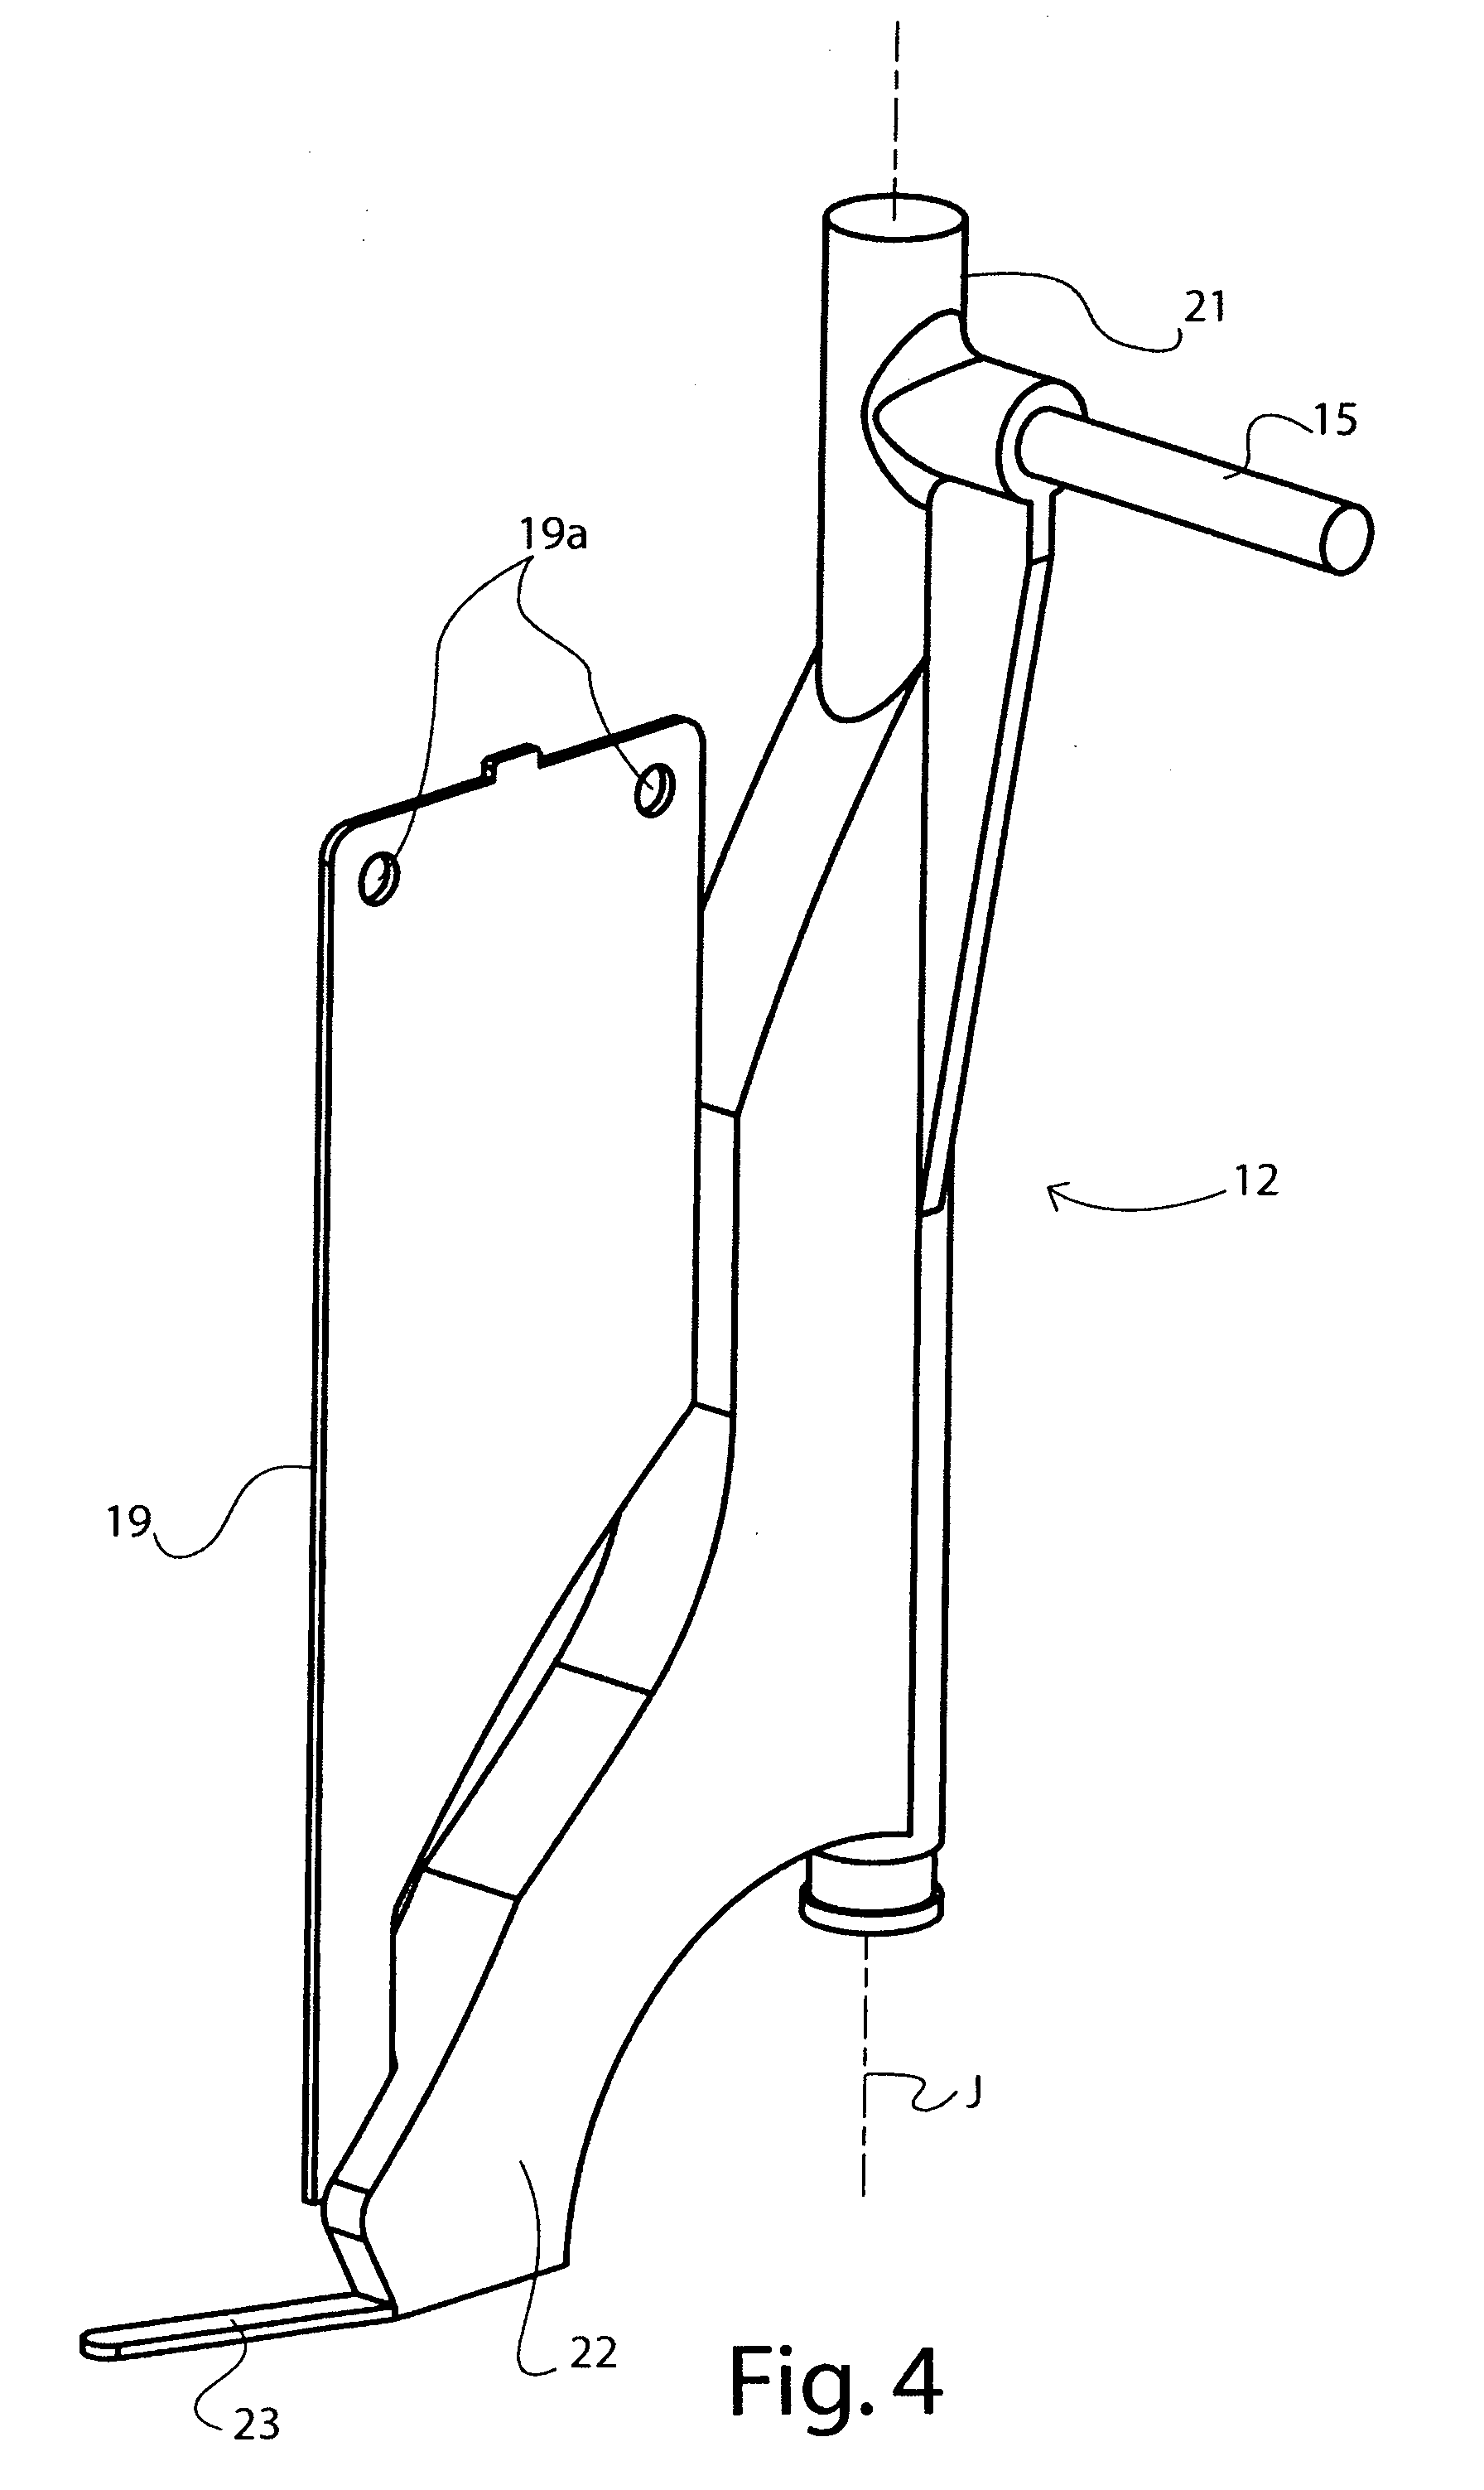 Overvoltage protection device comprising a disconnection accessory